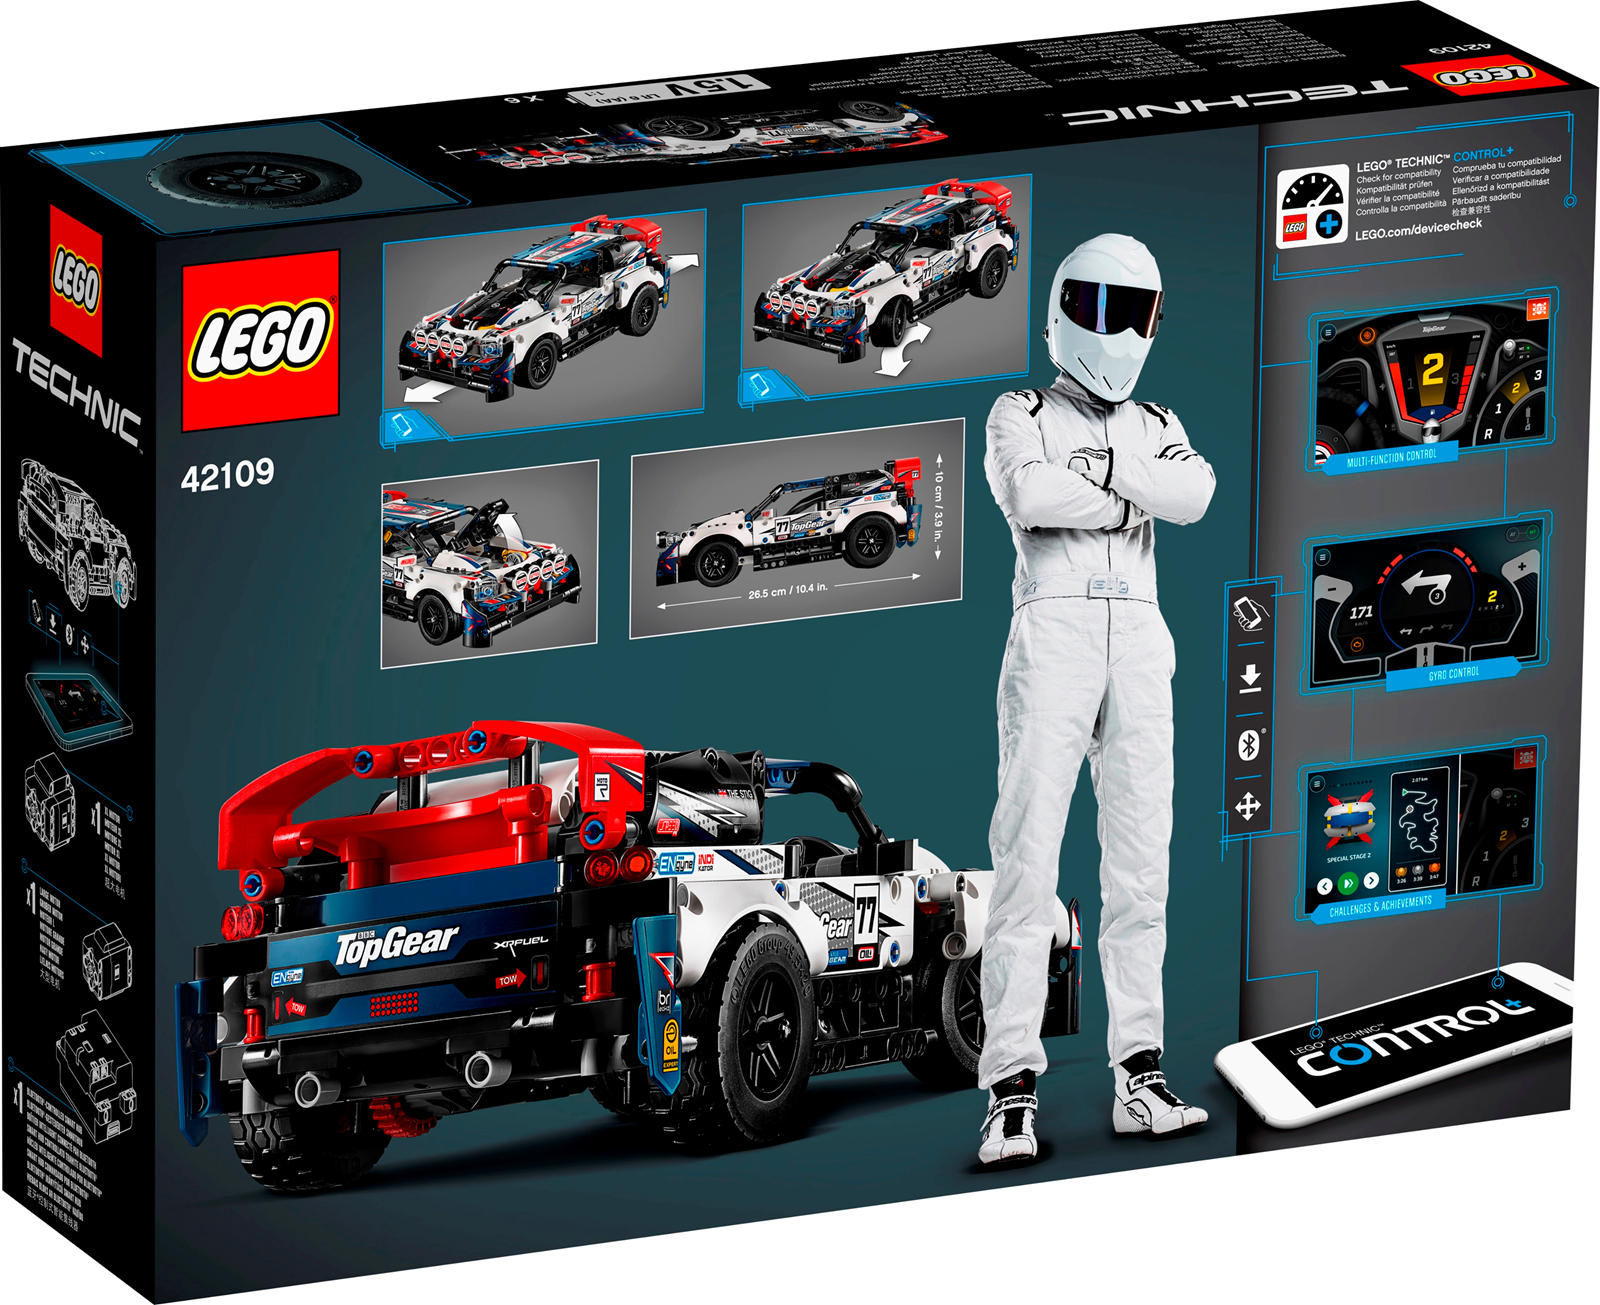 Get Ready For The Ultimate Lego Supercar CarBuzz